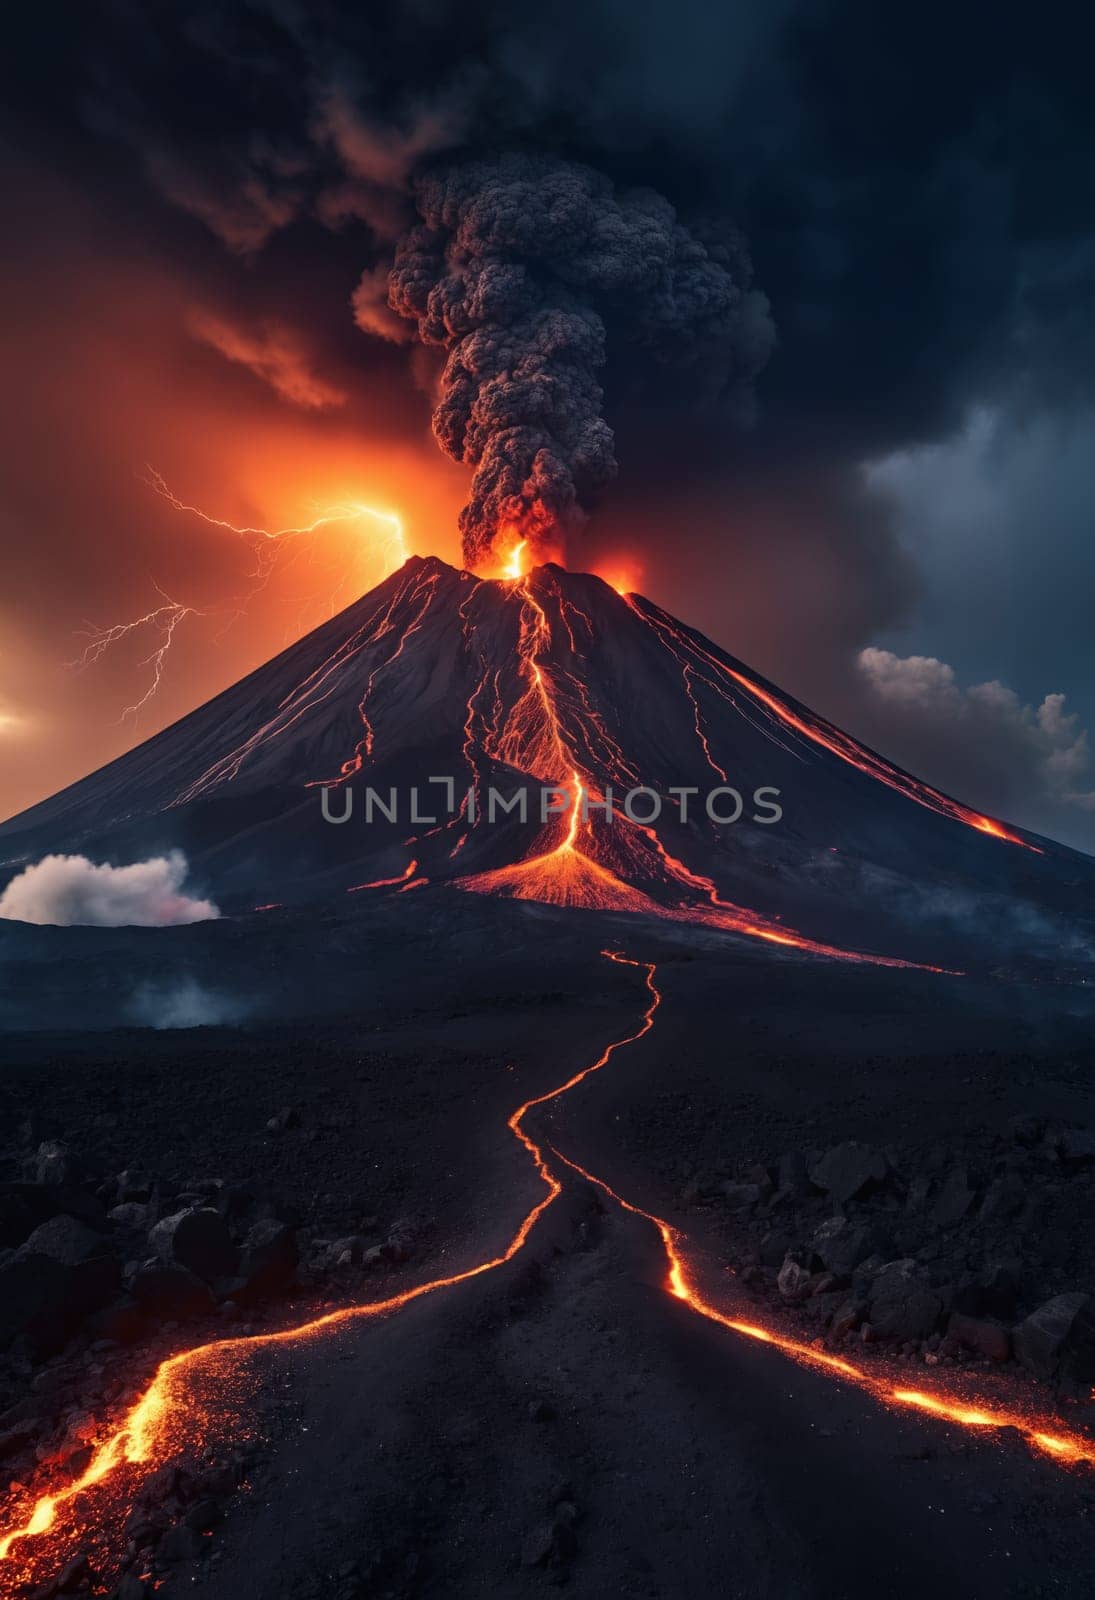 Strong volcanic eruption at night. Large column of smoke and flowing lava.